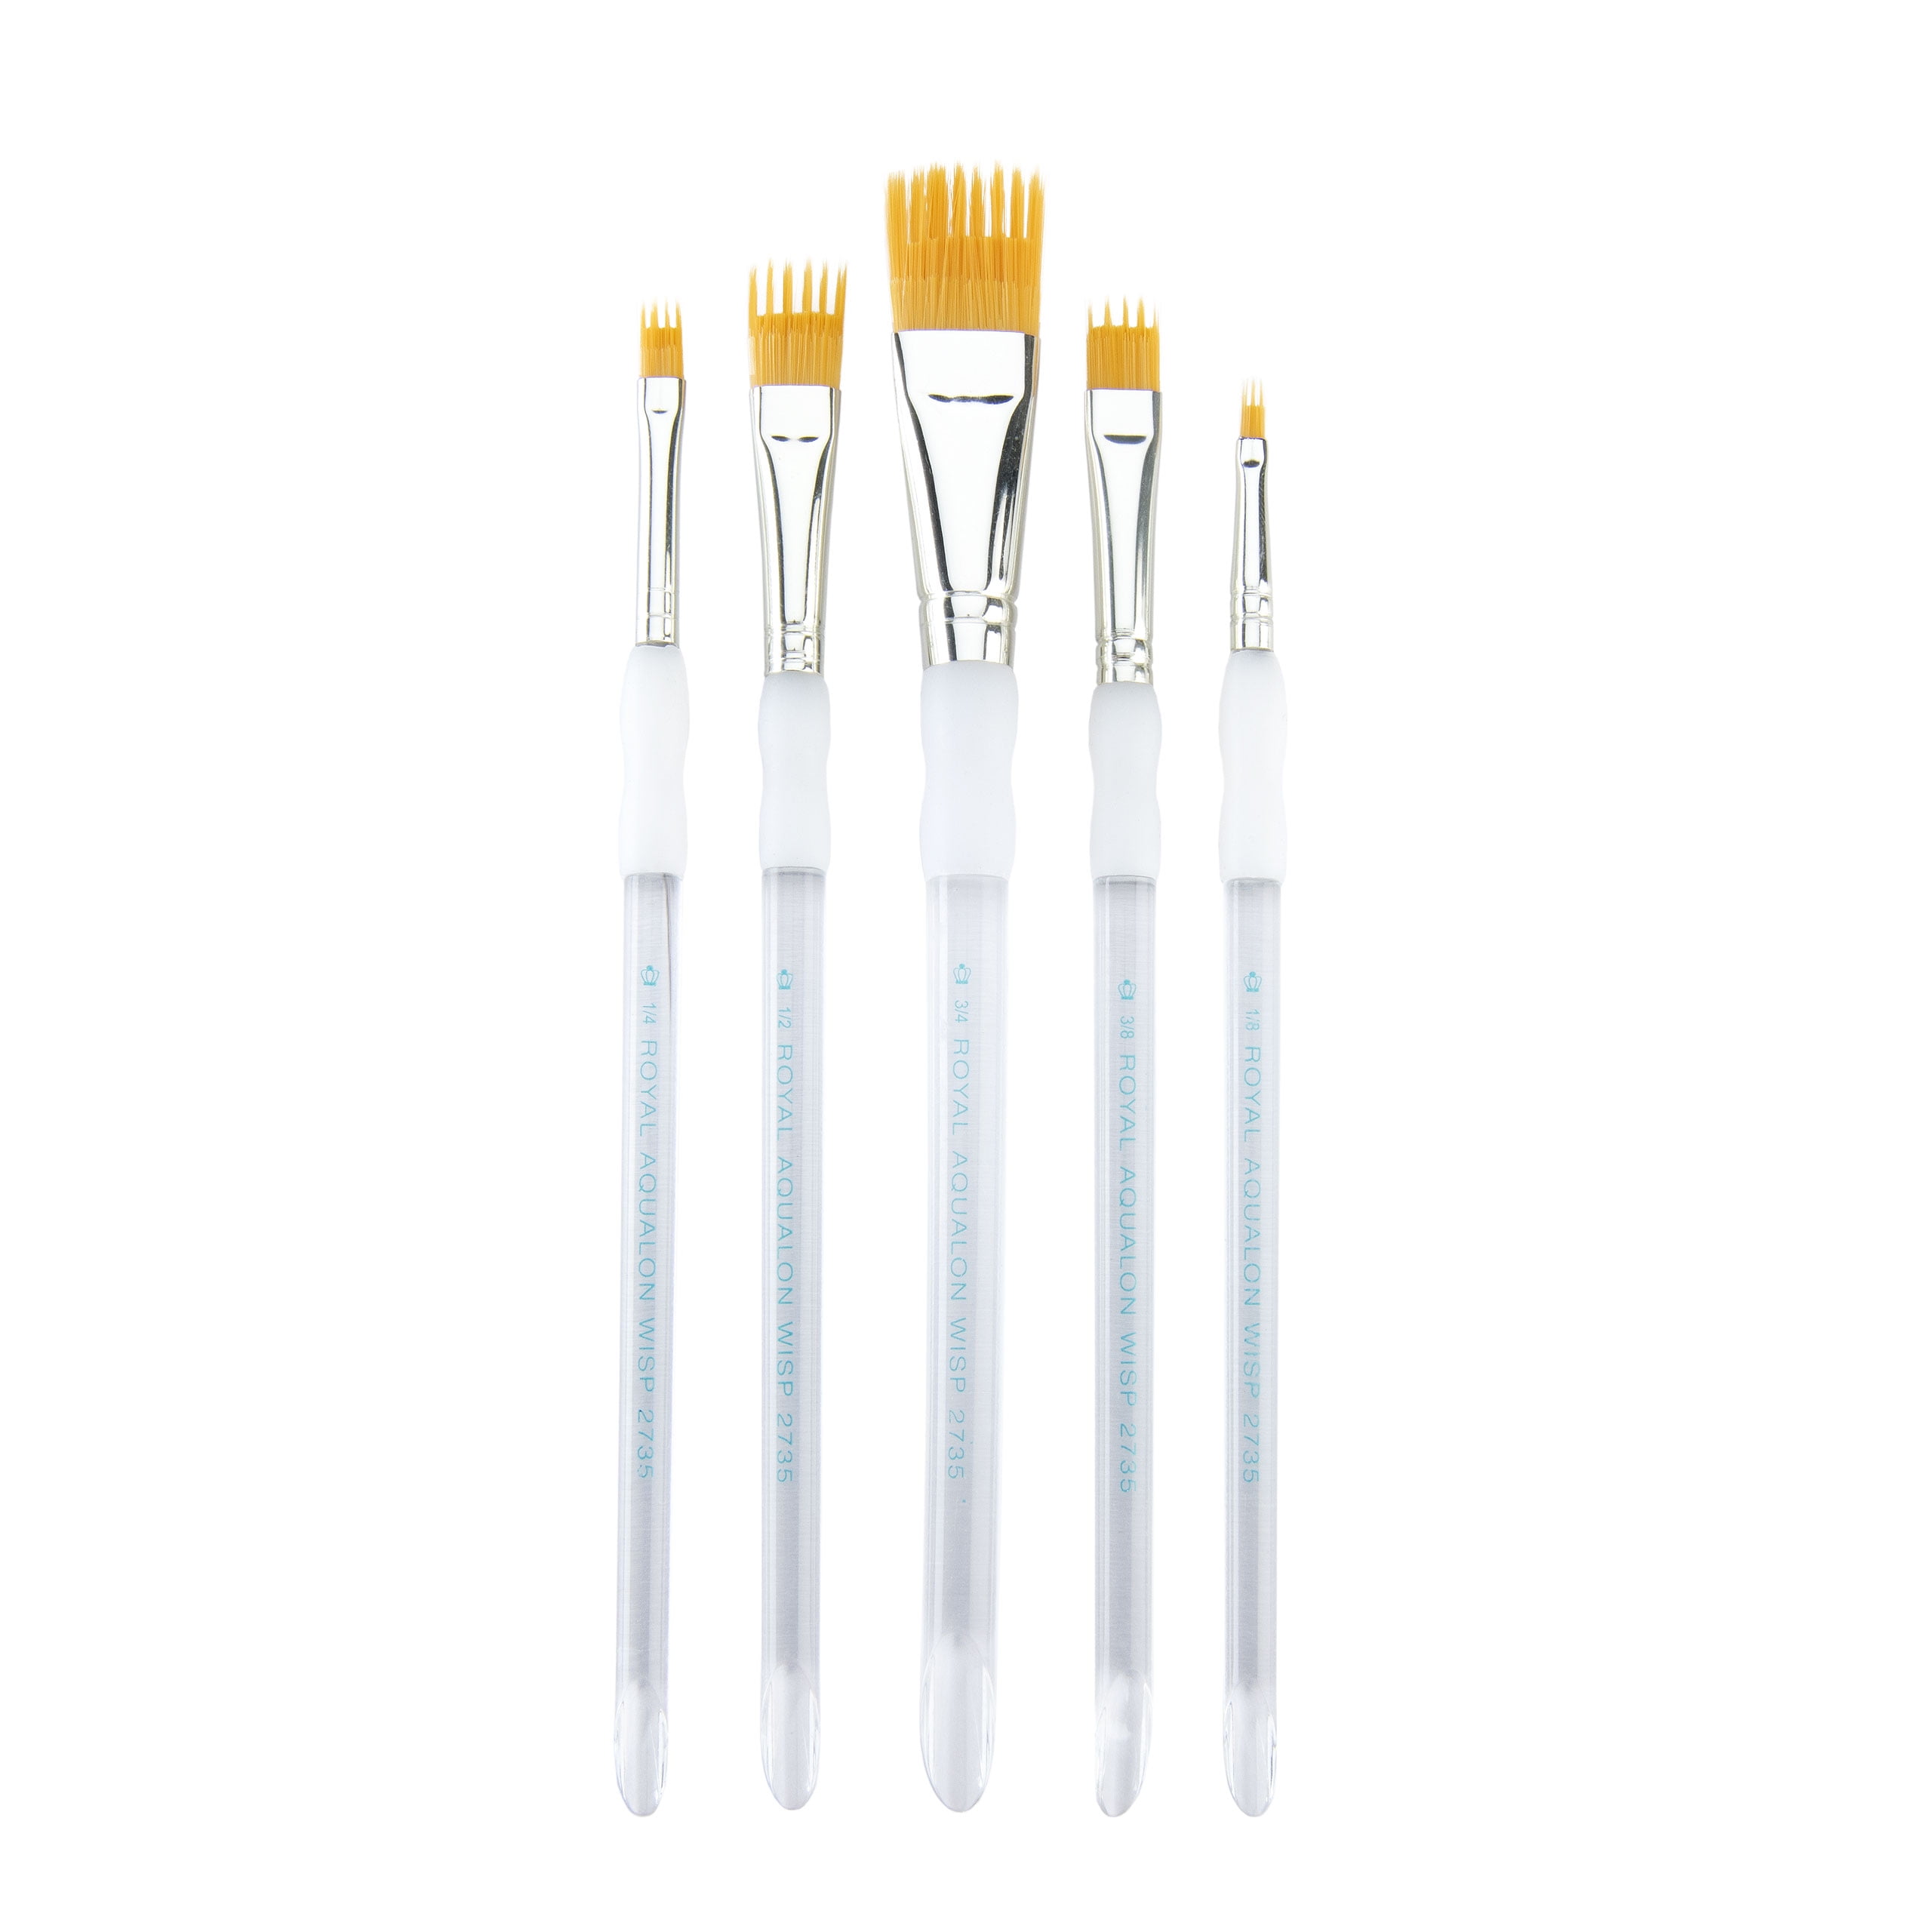 Incraftables Watercolor Paint Brushes Set (12 Pcs). Art Paintbrushes for Acrylic & Oil Painting